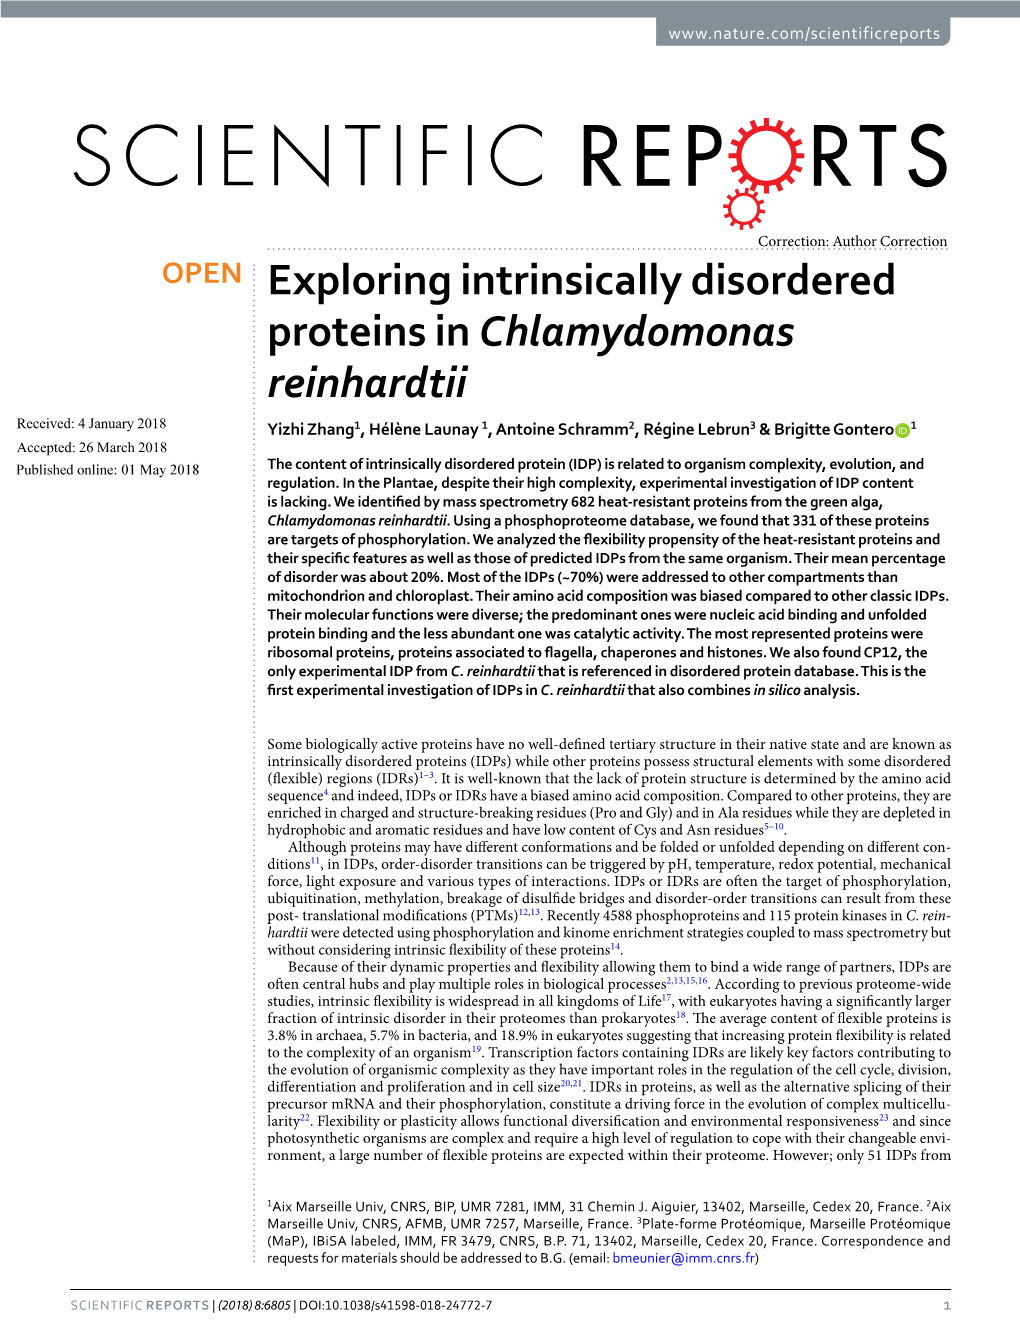 Exploring Intrinsically Disordered Proteins in Chlamydomonas